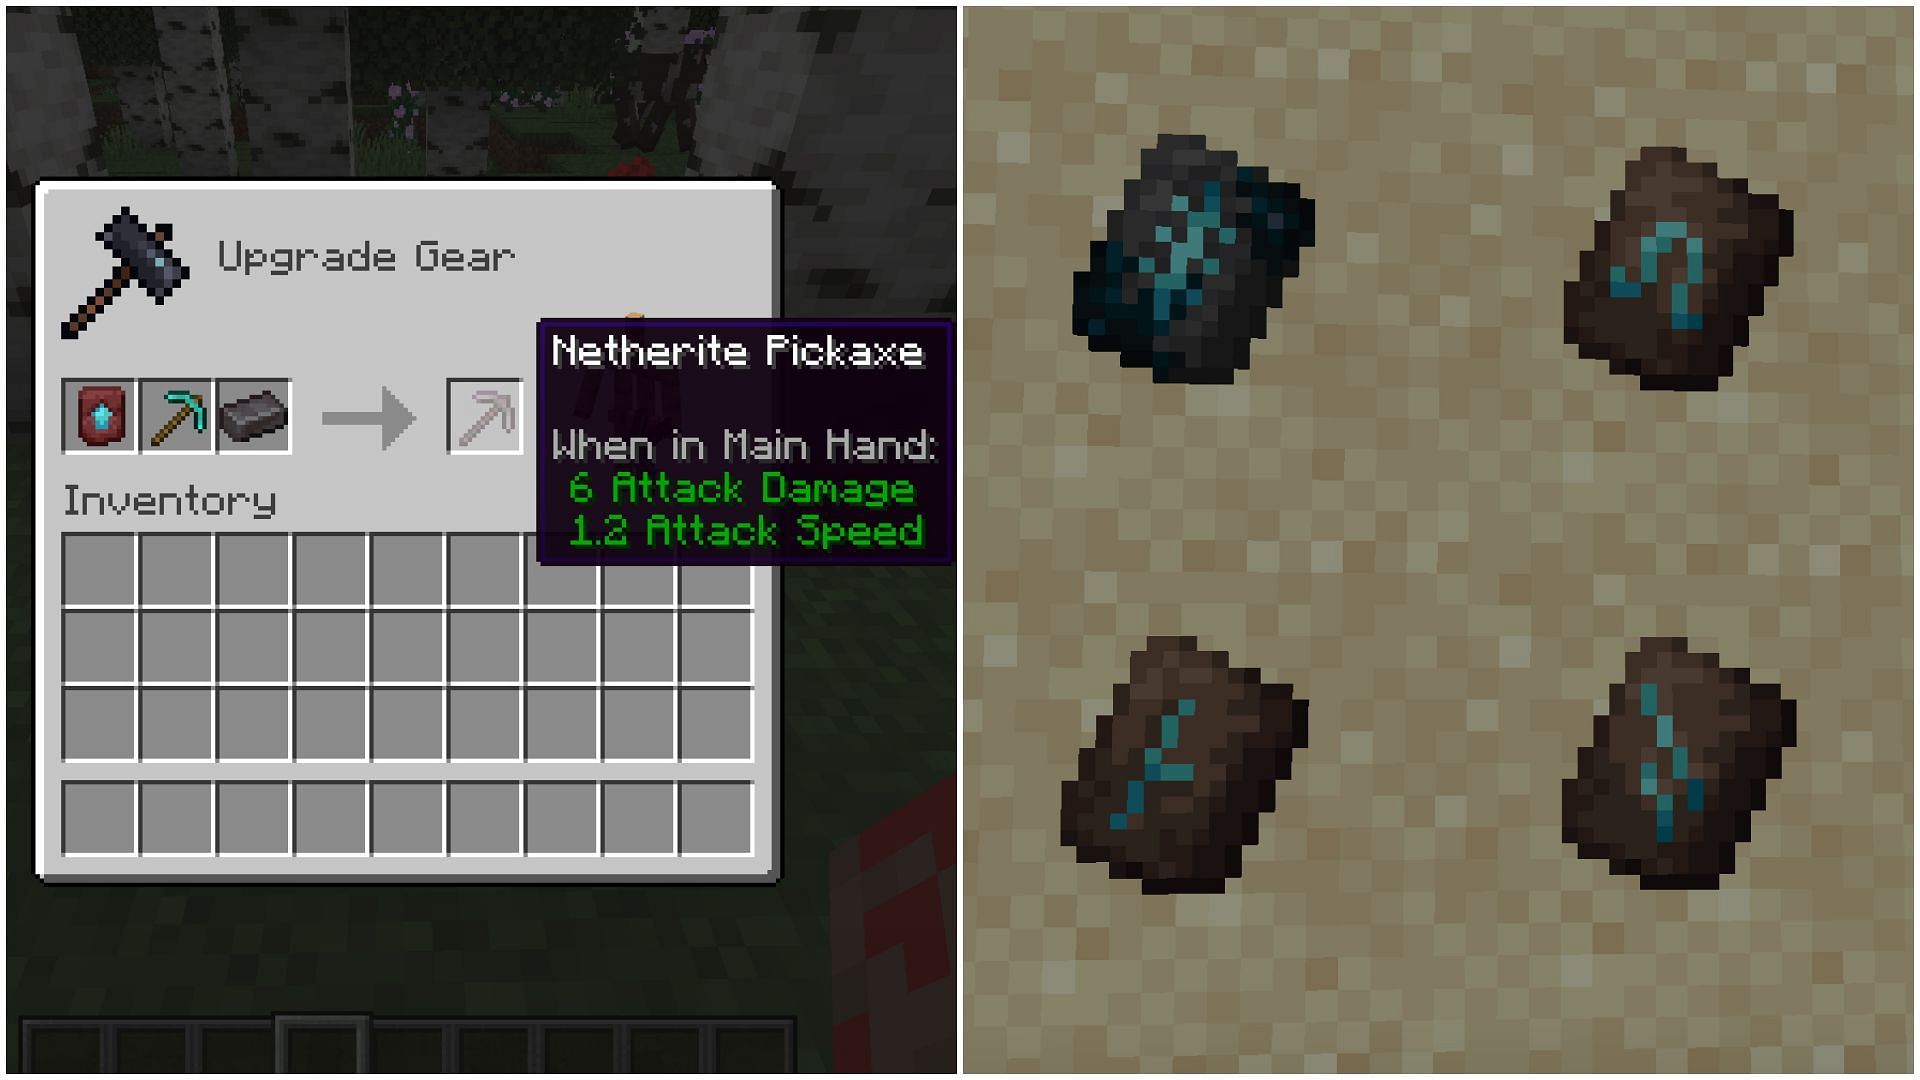 Smithing templates can customize armor designs and are needed to upgrade gear to netherite in Minecraft (Image via Sportskeeda)